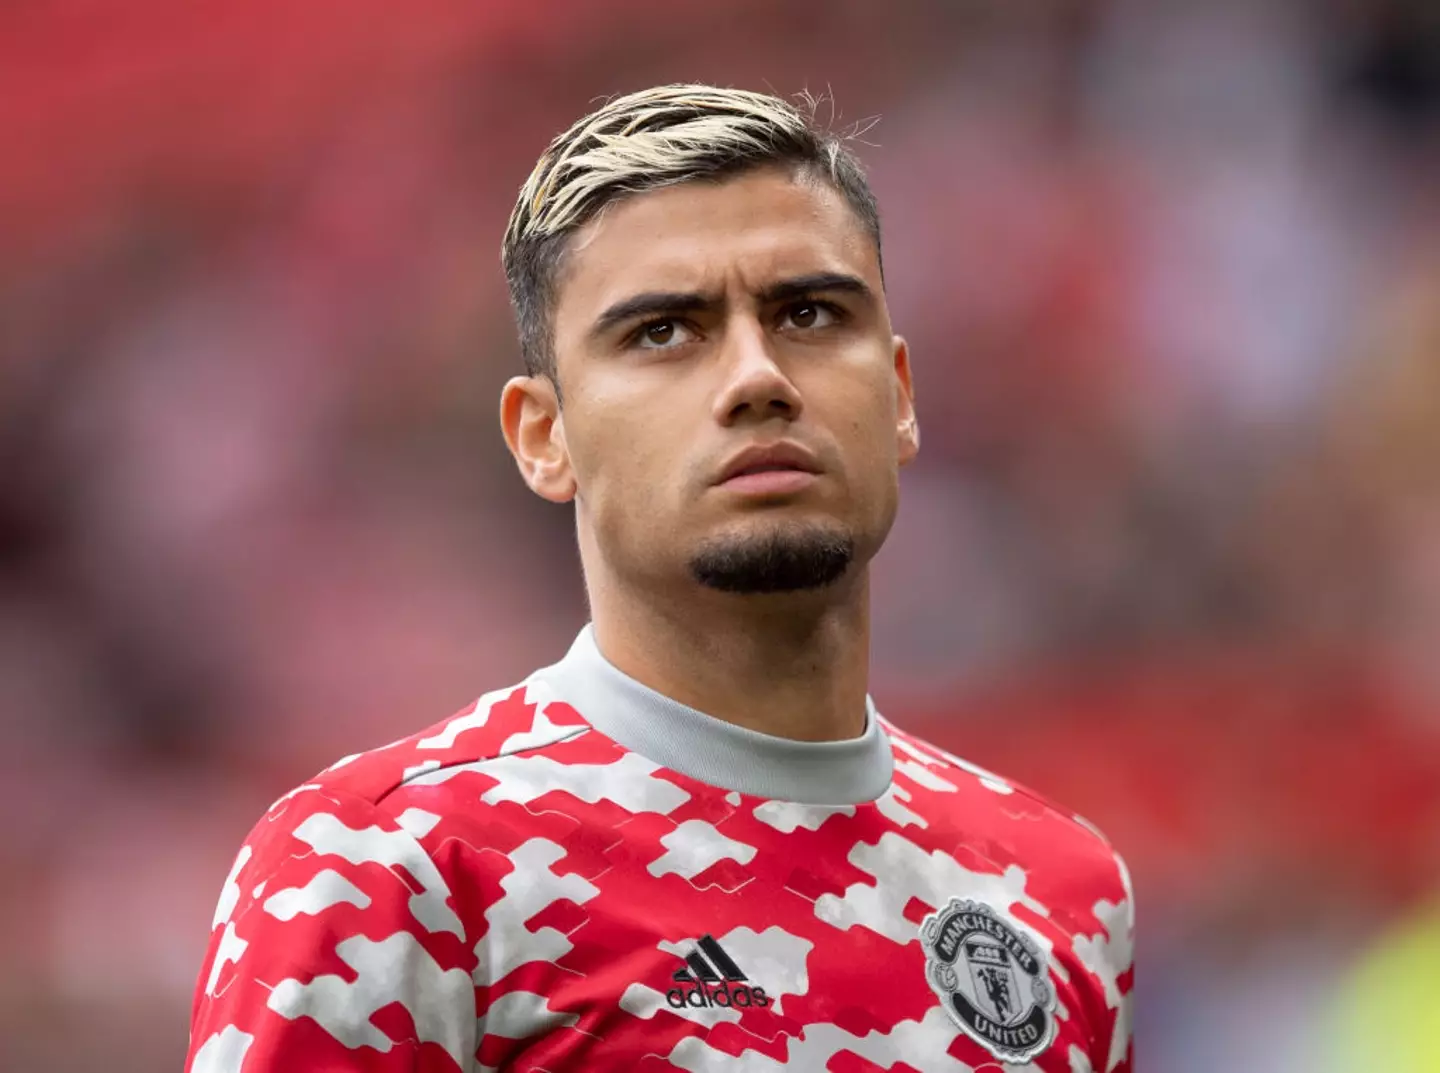 Pereira spent 11 years at Manchester United (Image: Getty)